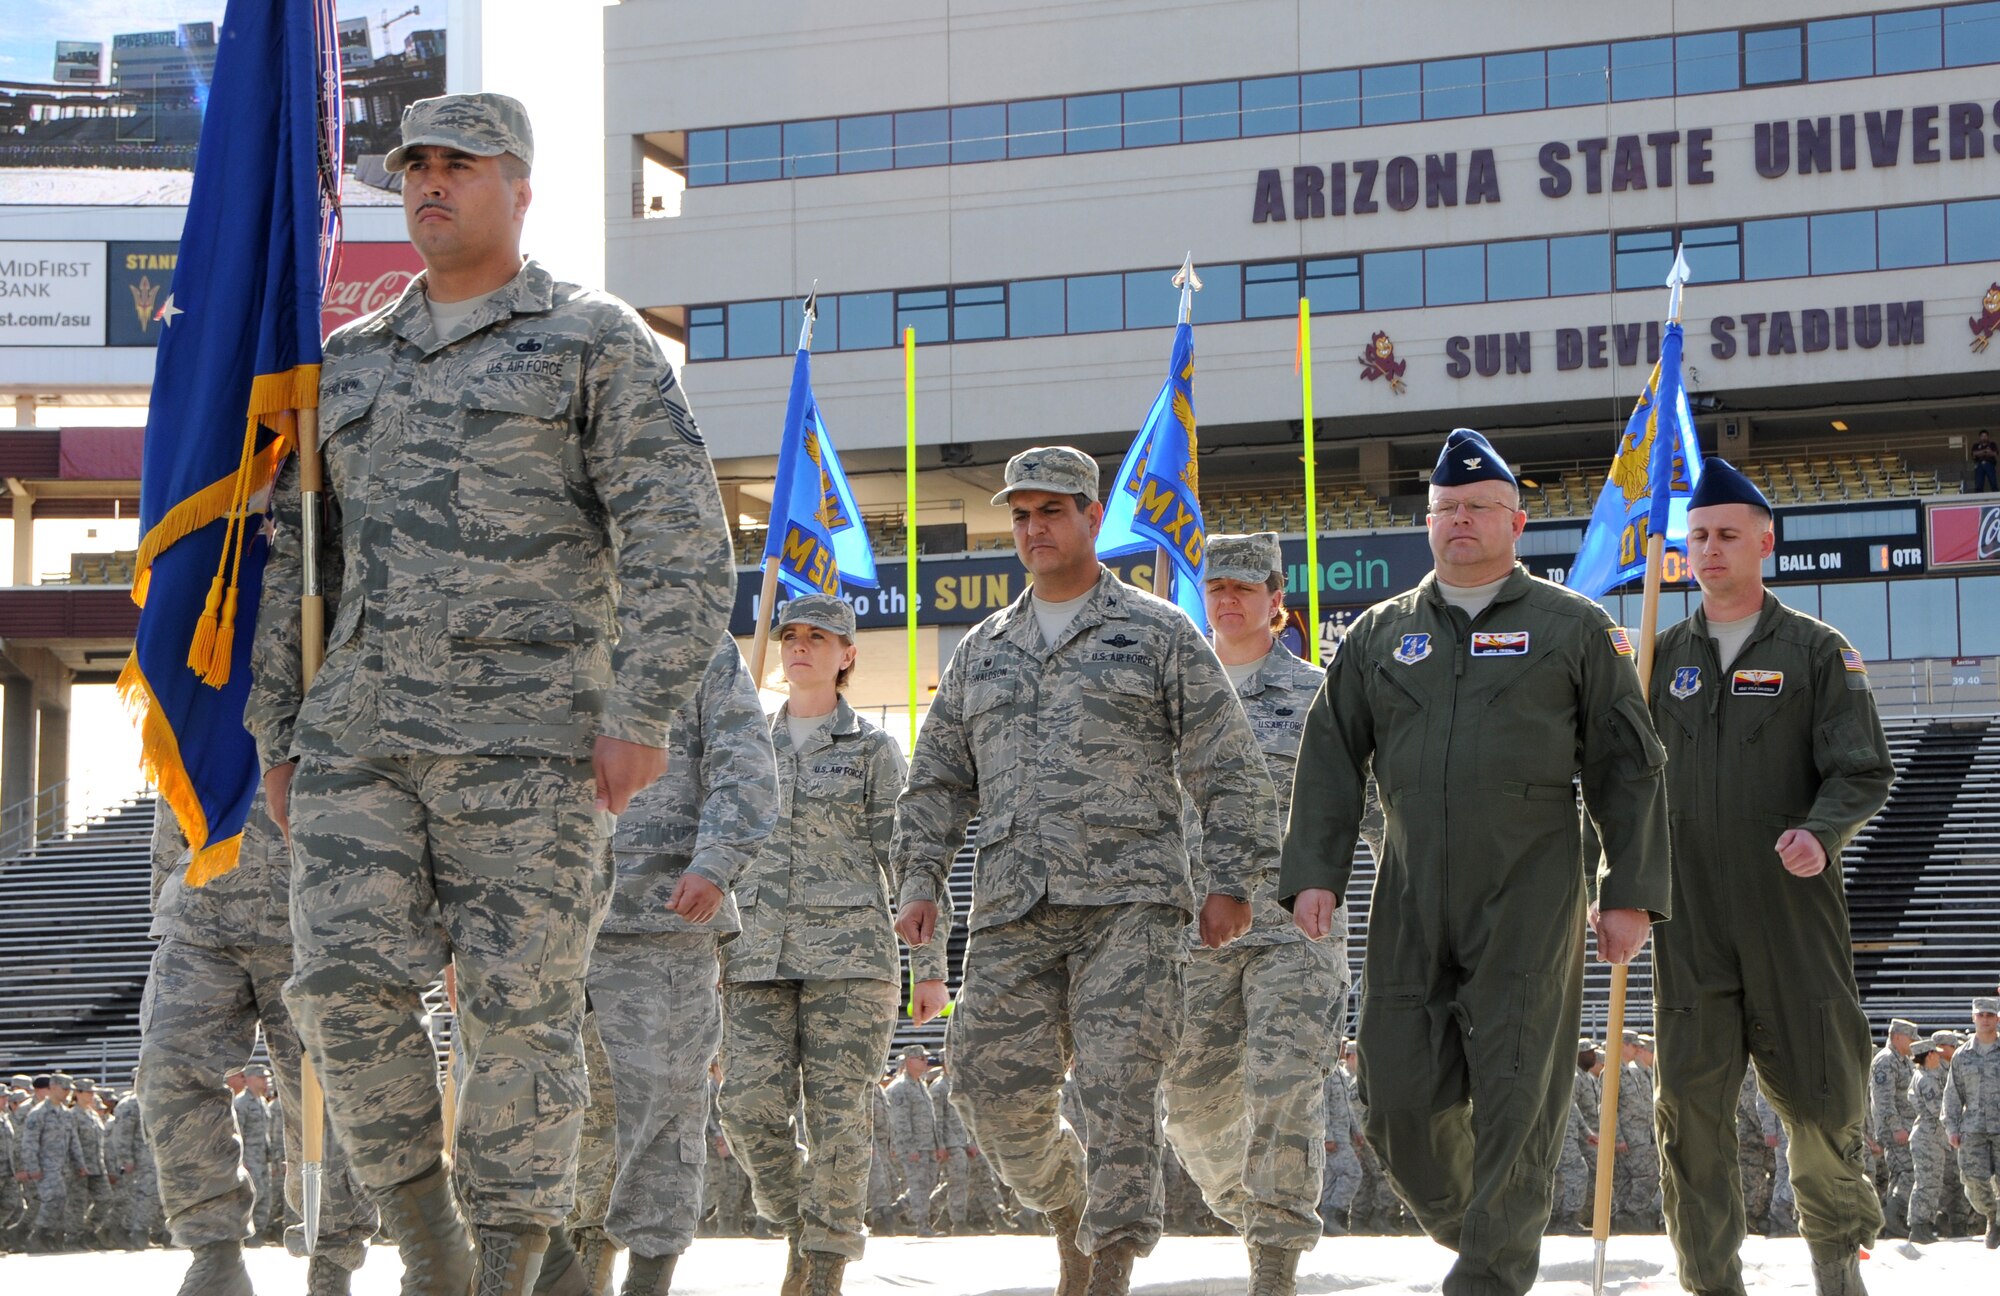 Senior Master Sgt. Alex brown, front, leads the Arizona Air National Guard’s 161st Air Refueling Wing during a march at Sun Devil Stadium in Tempe, Ariz., Dec. 7, 2014. Brown’s prior experience as military training instructor made him the unit’s resident expert on drill and ceremonies and gave him skills that, he said, helped him graduate from law school. Brown recently passed the Arizona bar exam and fulfilled a personal dream to become an attorney. (U.S. Air National Guard photo by Tech. Sgt. Courtney Enos)